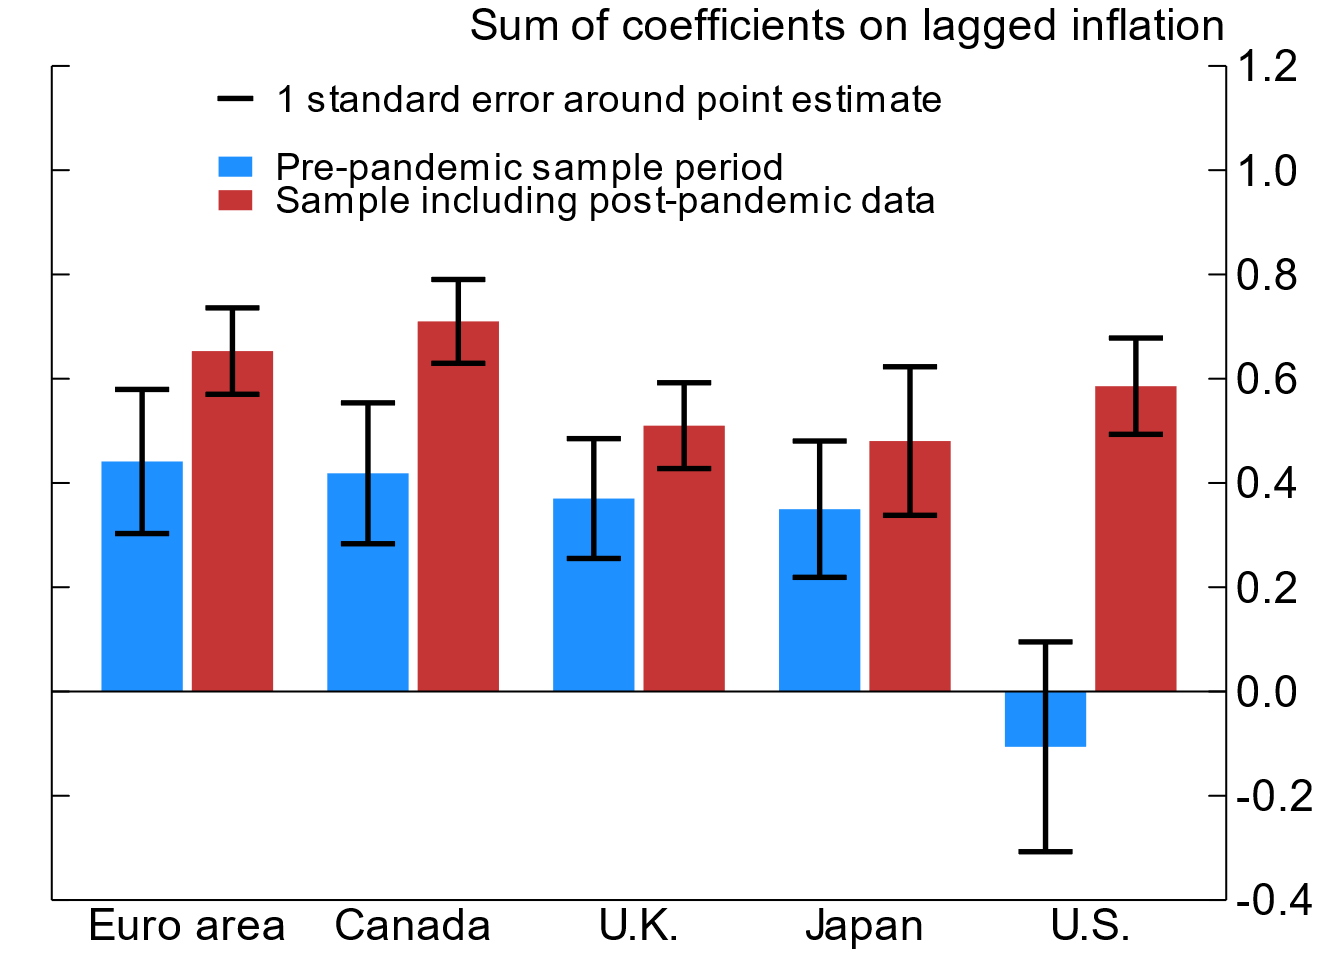 Figure 1. Inflation Persistence in Major Advanced Economies. See accessible link for data.